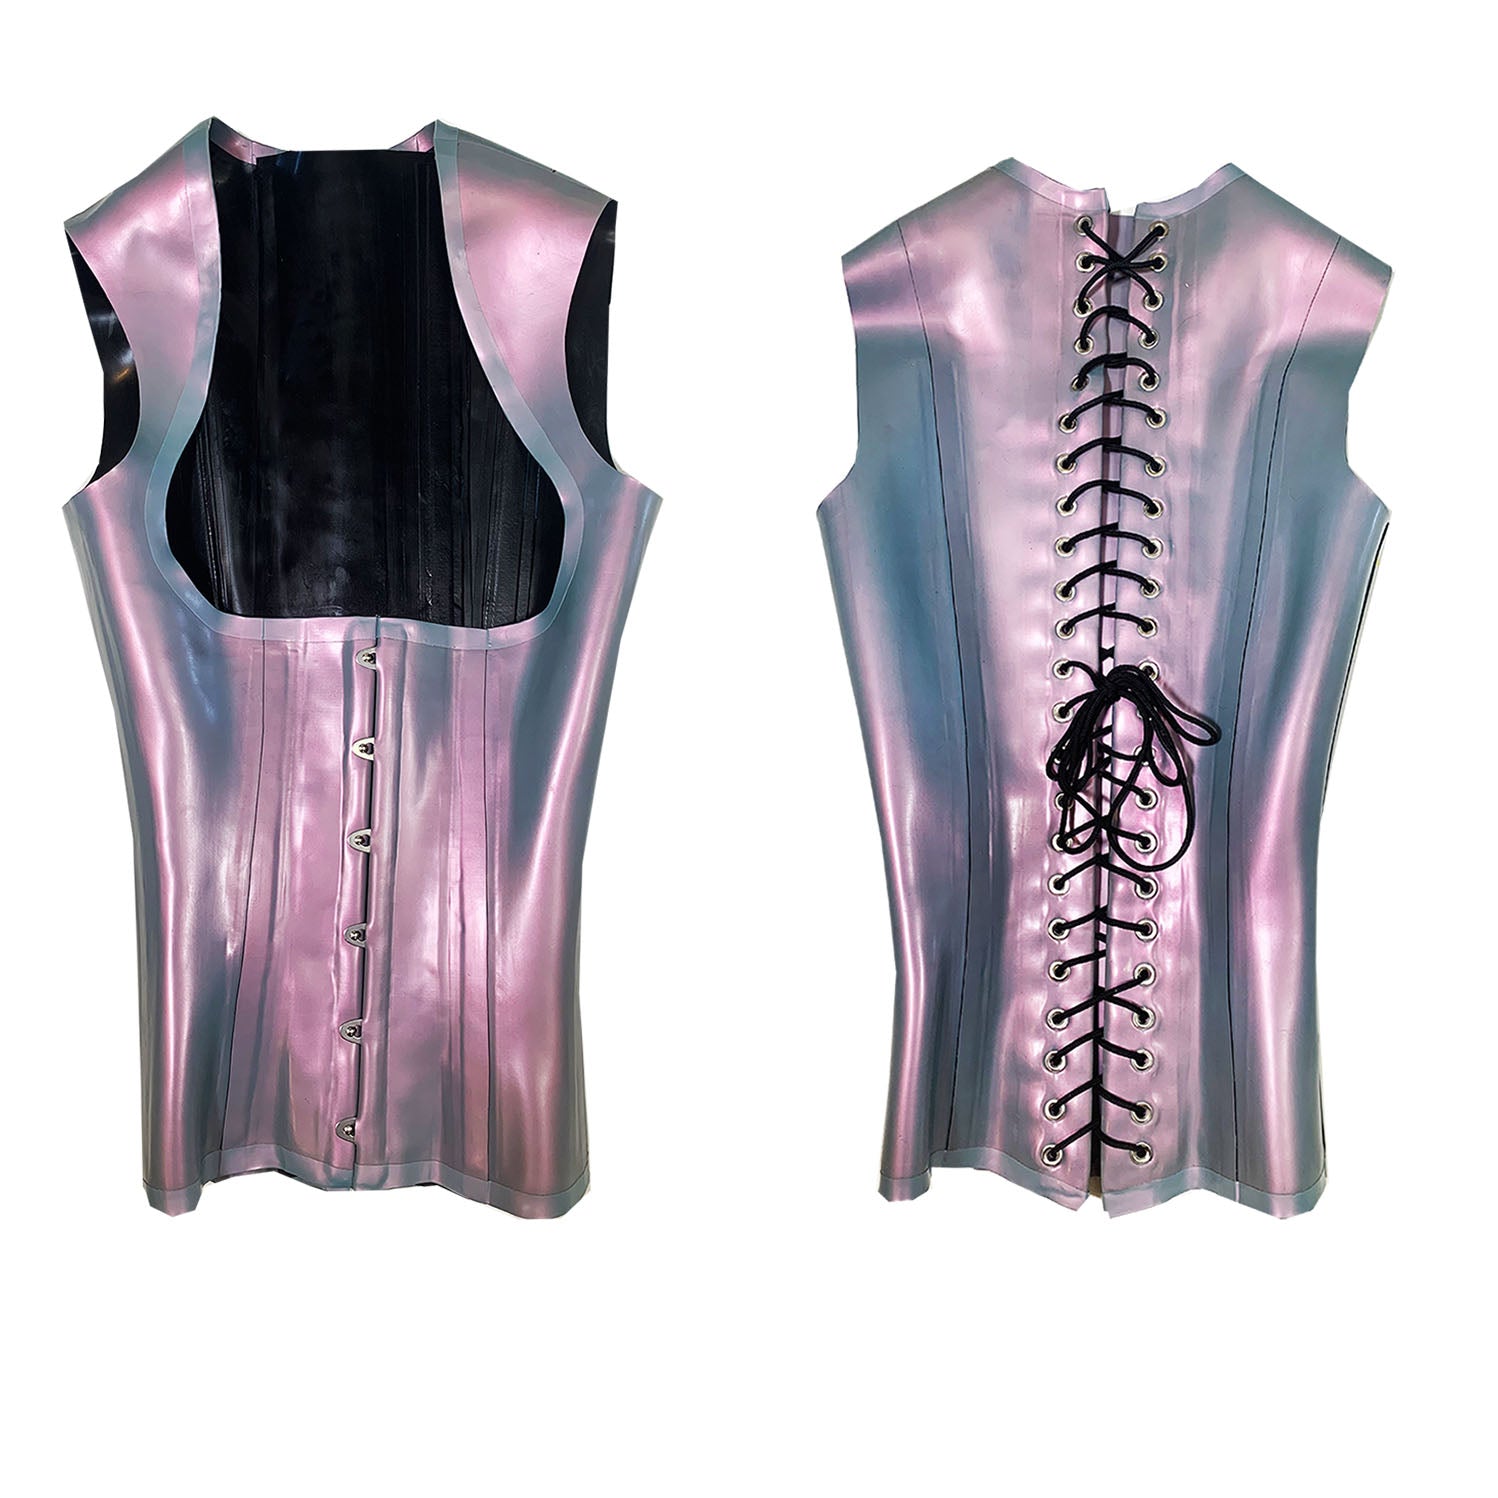 Corset Vests  𝑪𝒐𝒓𝒔𝒆𝒕 𝑽𝒆𝒔𝒕s 🖤 Order yours: bit.ly